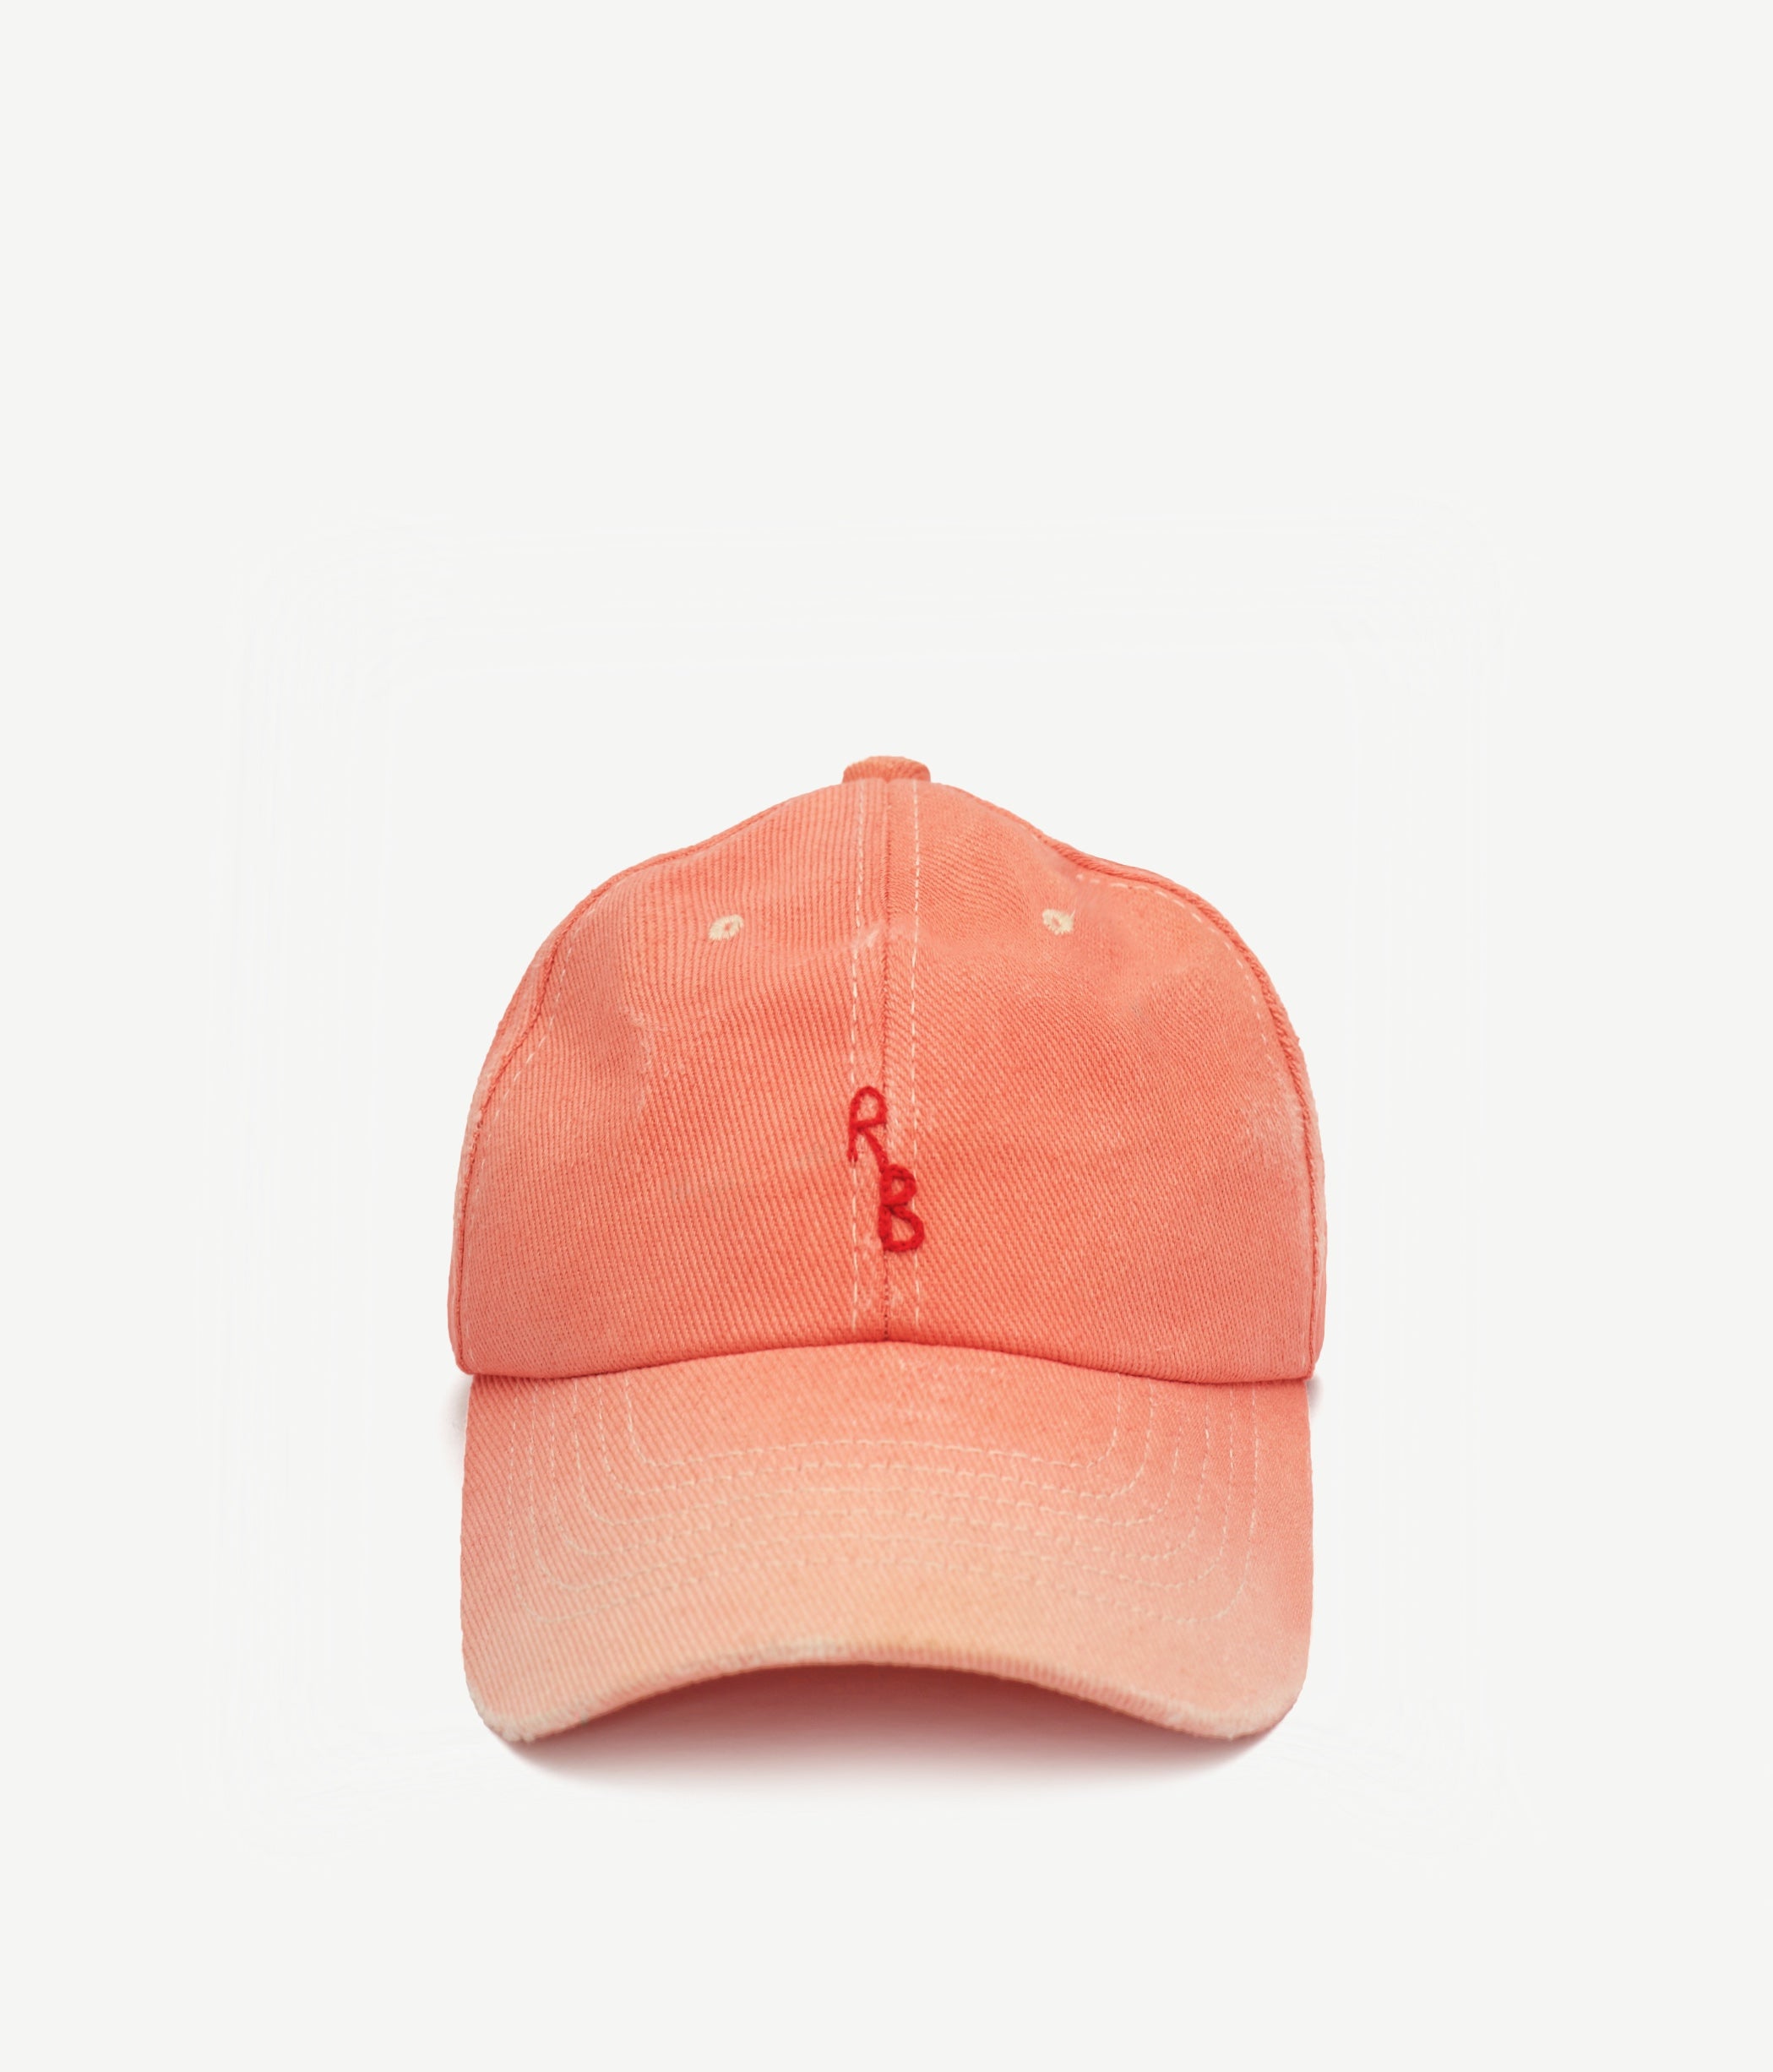 A color for every day with RB Baseball Cap